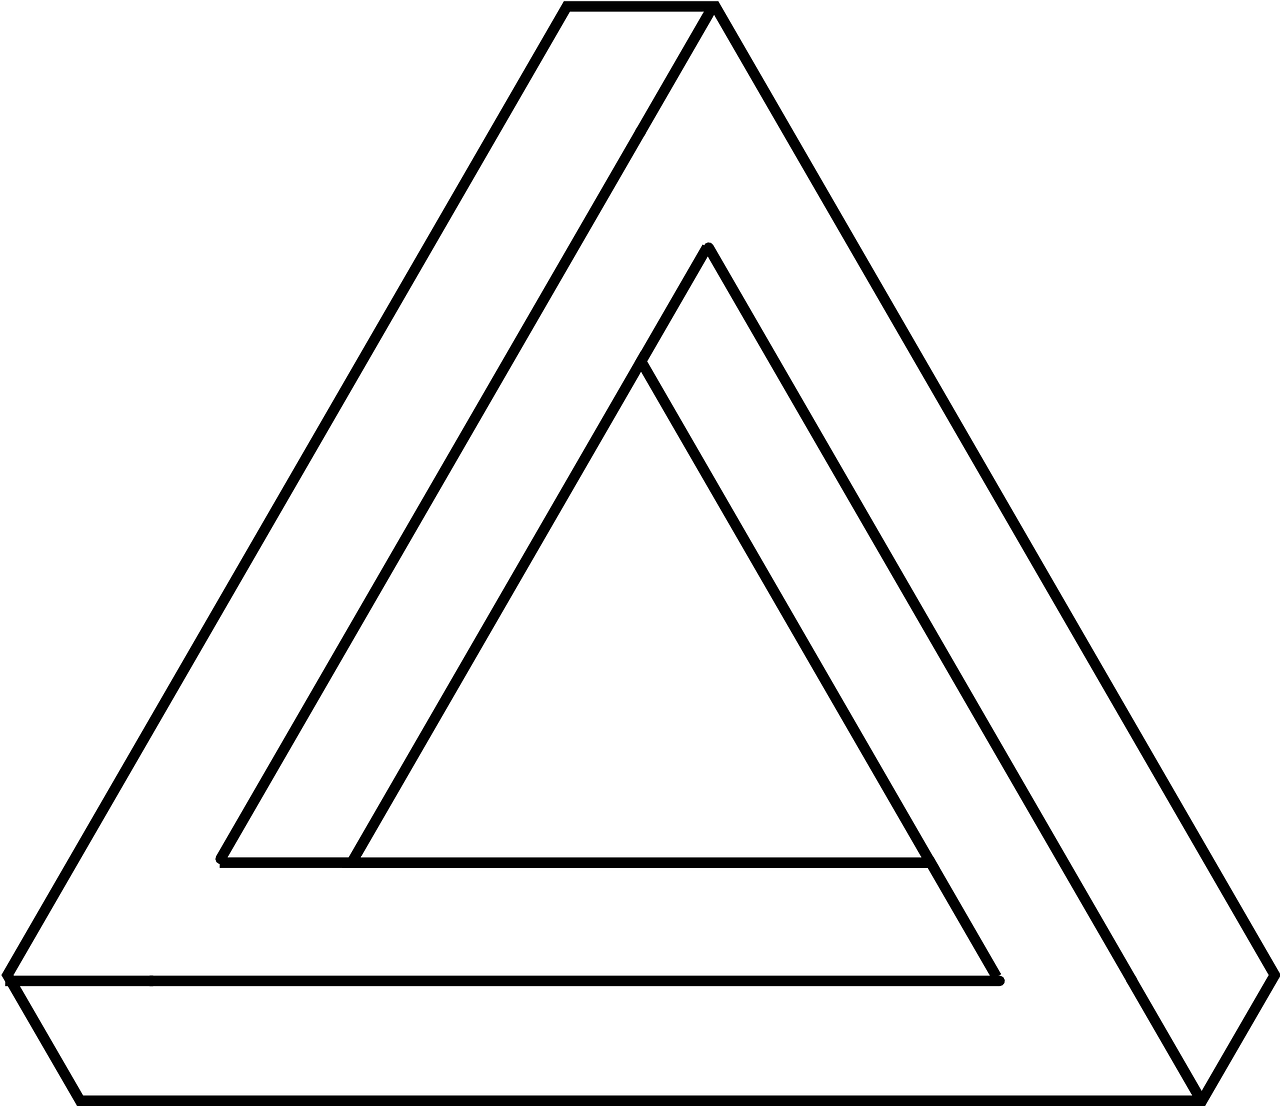 A White Triangle With Black Background